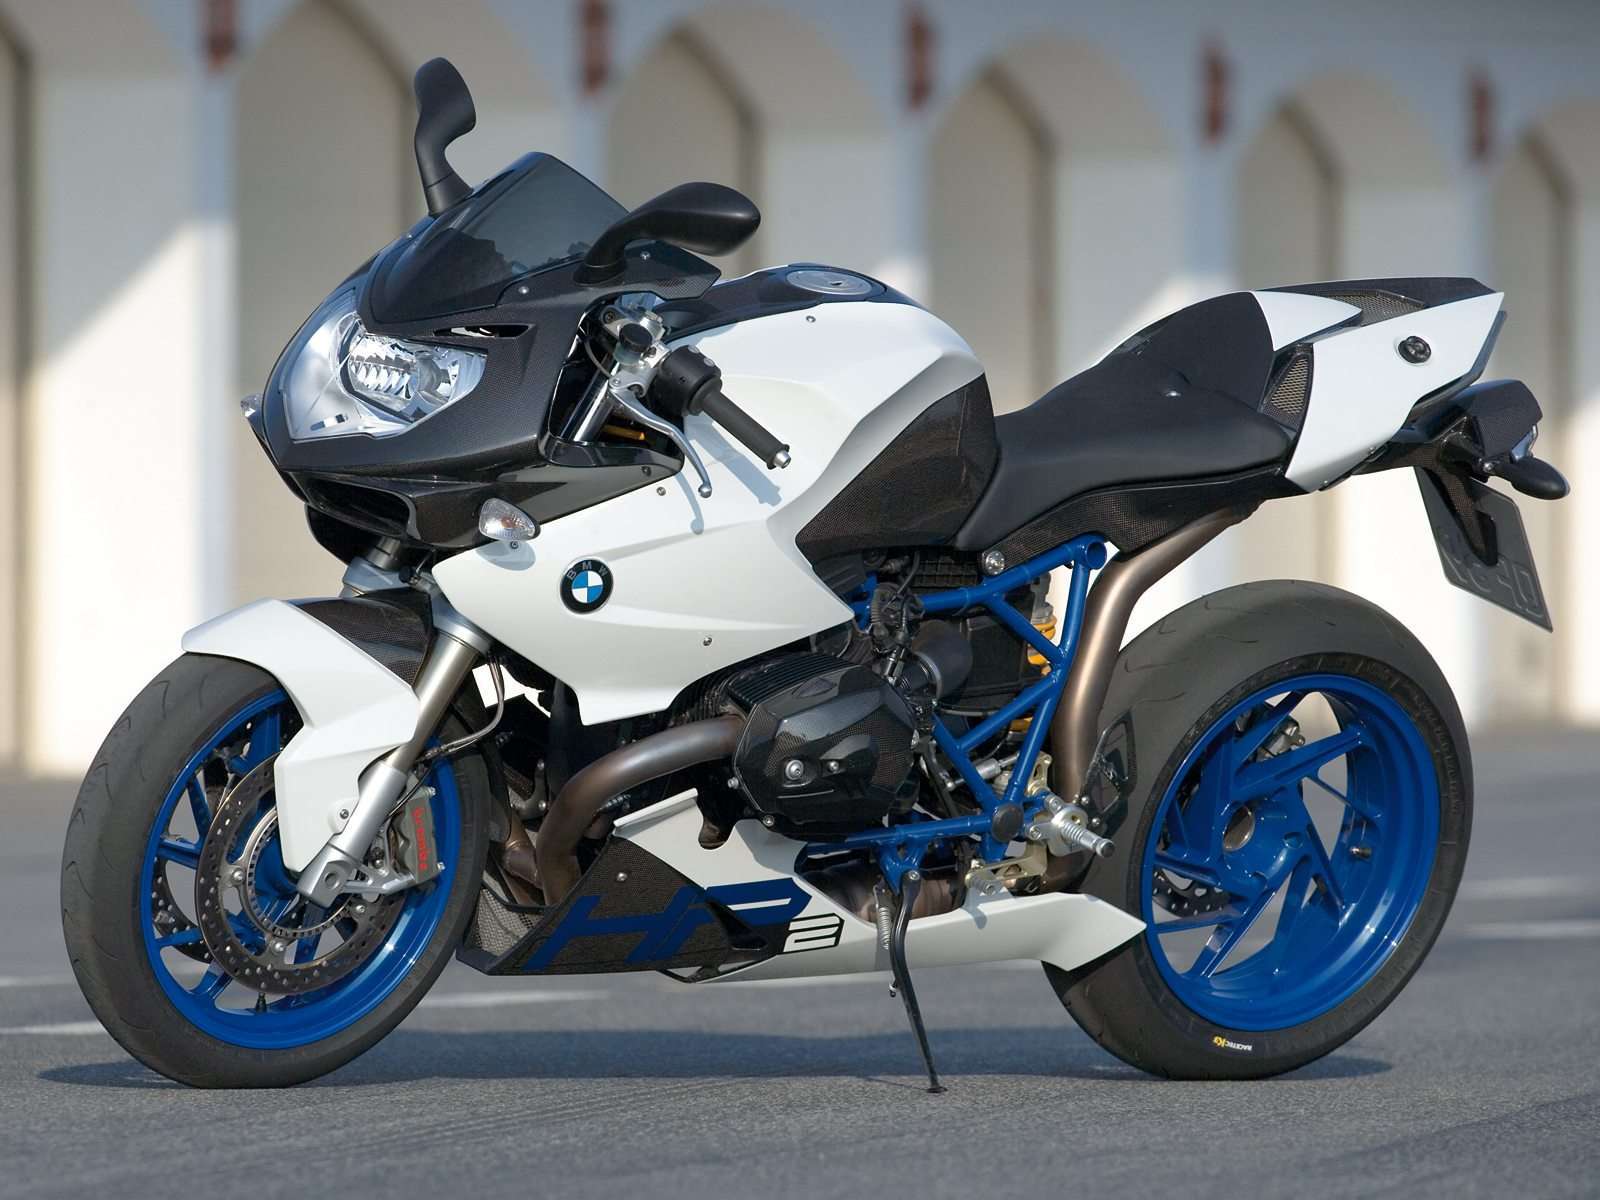 BMW Motorcycle Backgrounds